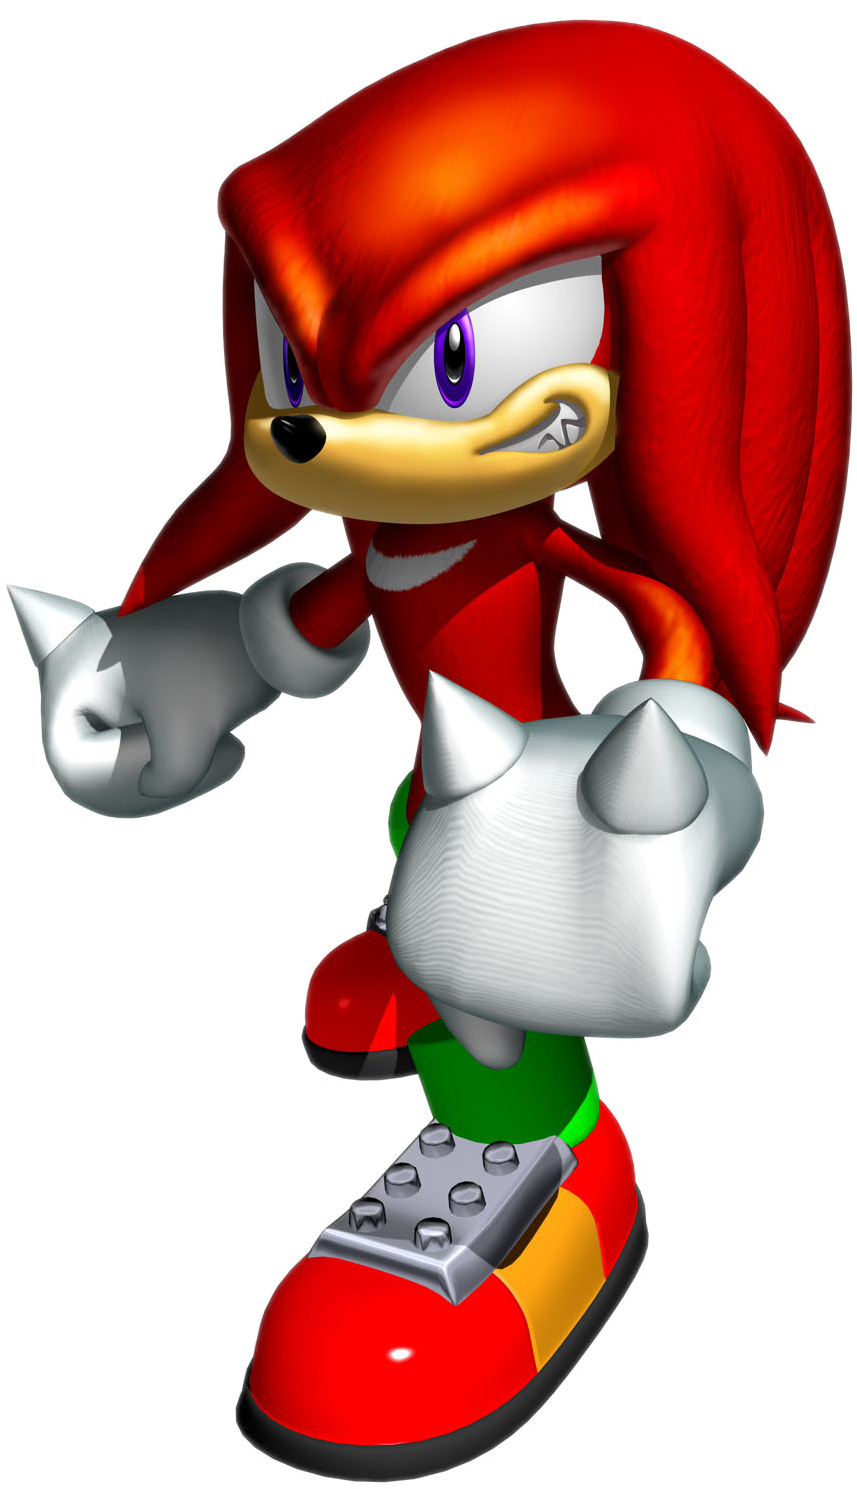 Added By Sonictoastknuckles Appears As A Playable Character - Knuckles The Echidna Sonic Heroes (888x1500)